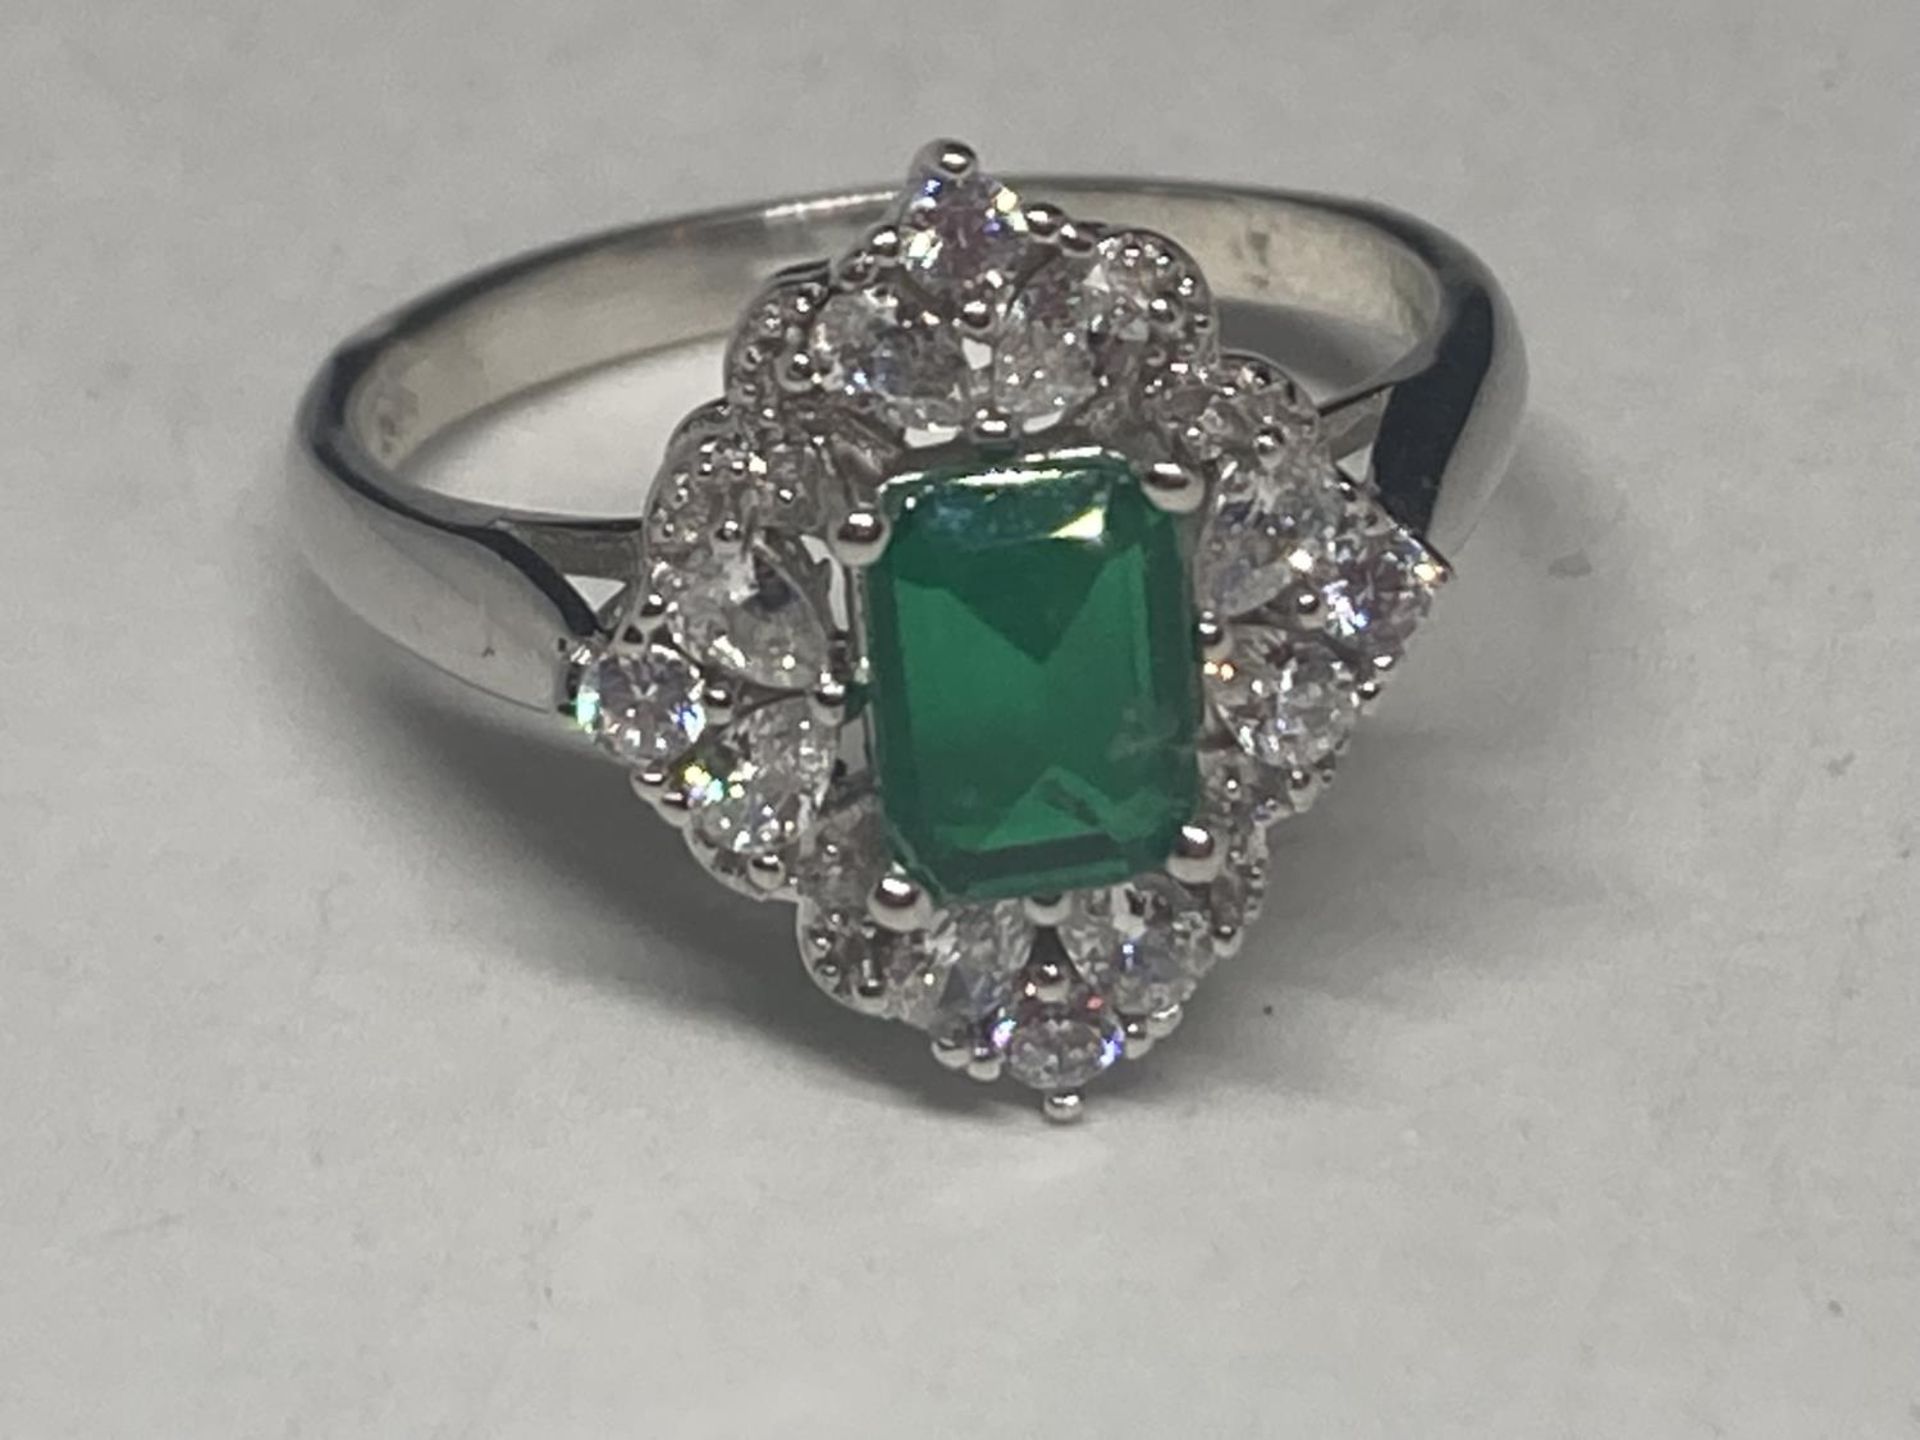 A WHITE METAL RING WITH A RECTANGULAR LABORATORY EMERALD SURROUNDED BY CLEAR STONES SIZE Q/R